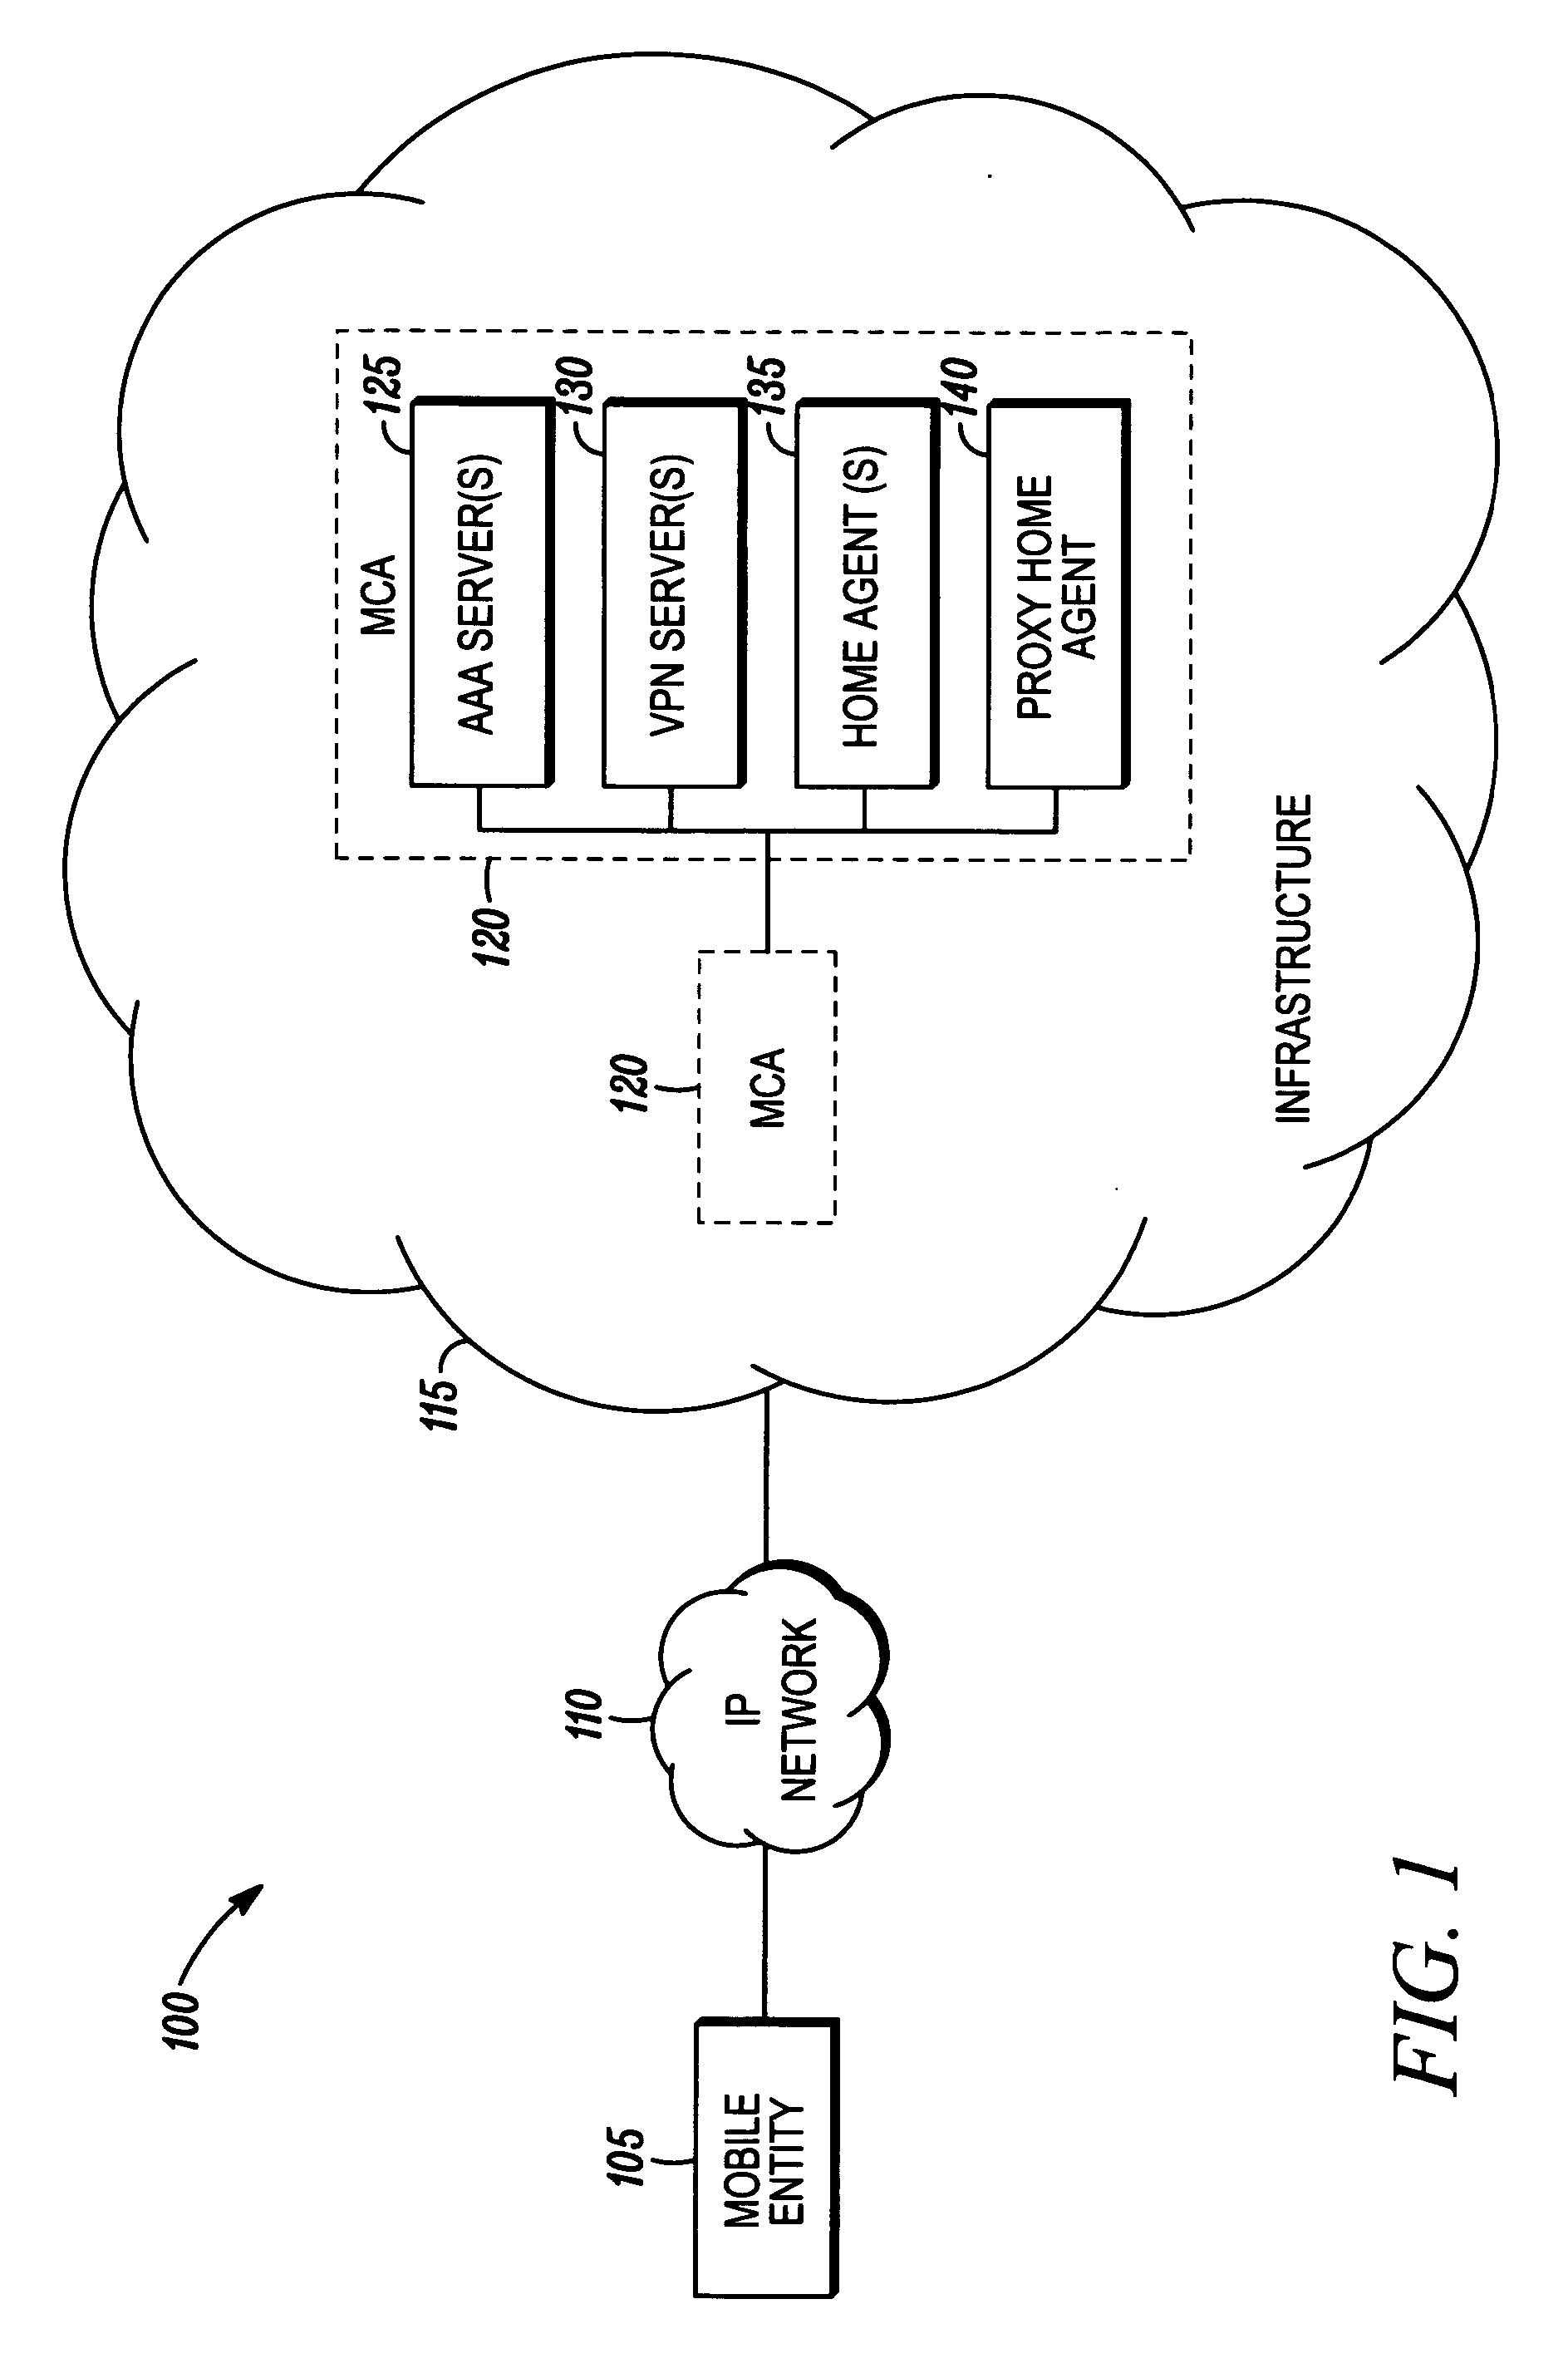 Method of dynamically assigning mobility configuration parameters for mobile entities